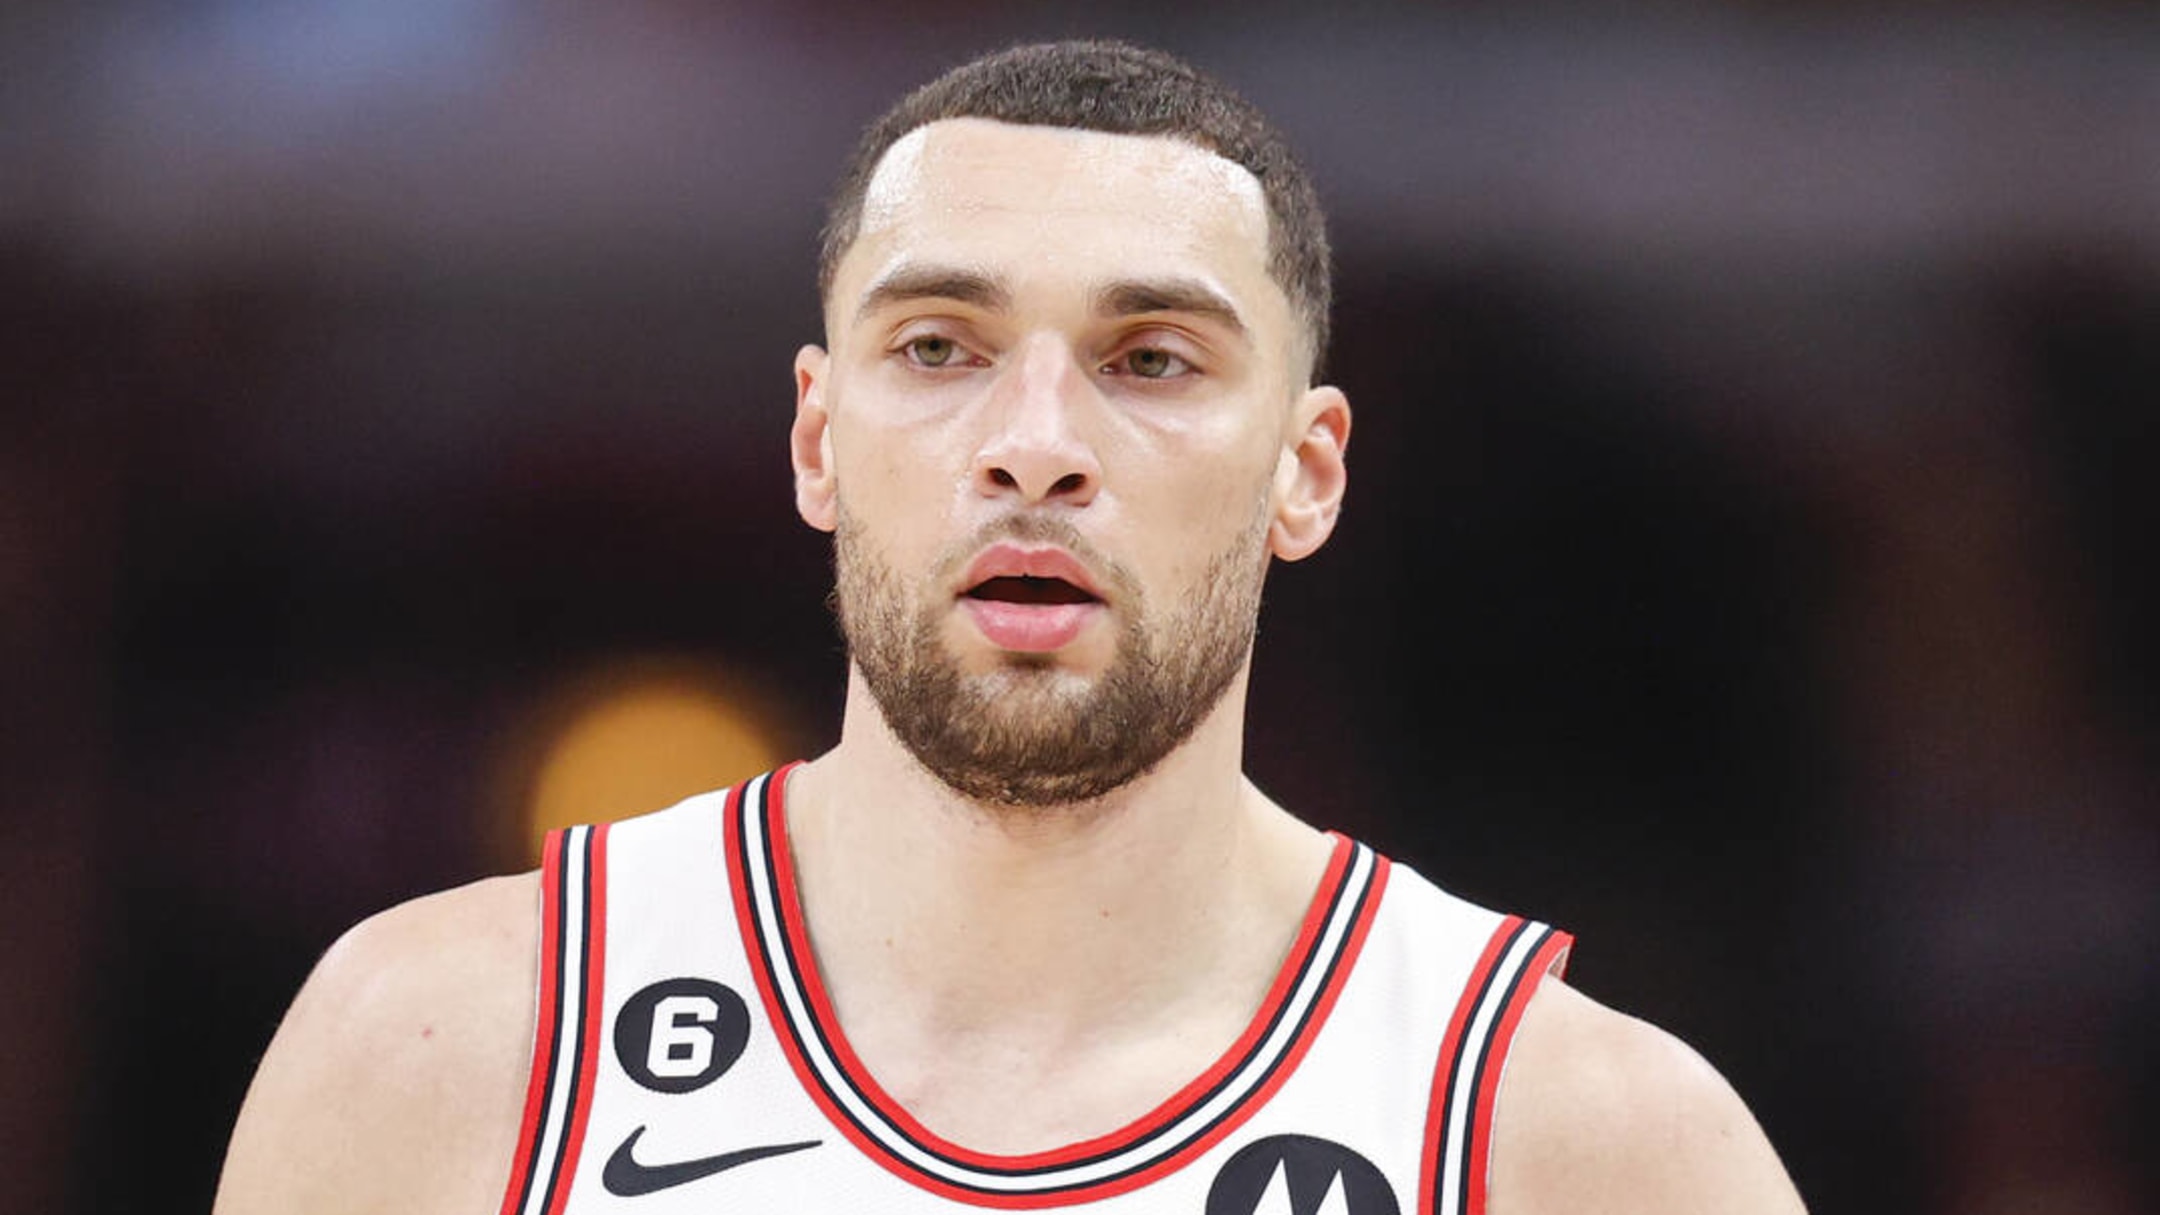 NBA Rumors: Zach LaVine Expected To Re-Sign With Bulls Despite Interest  From Lakers & Others